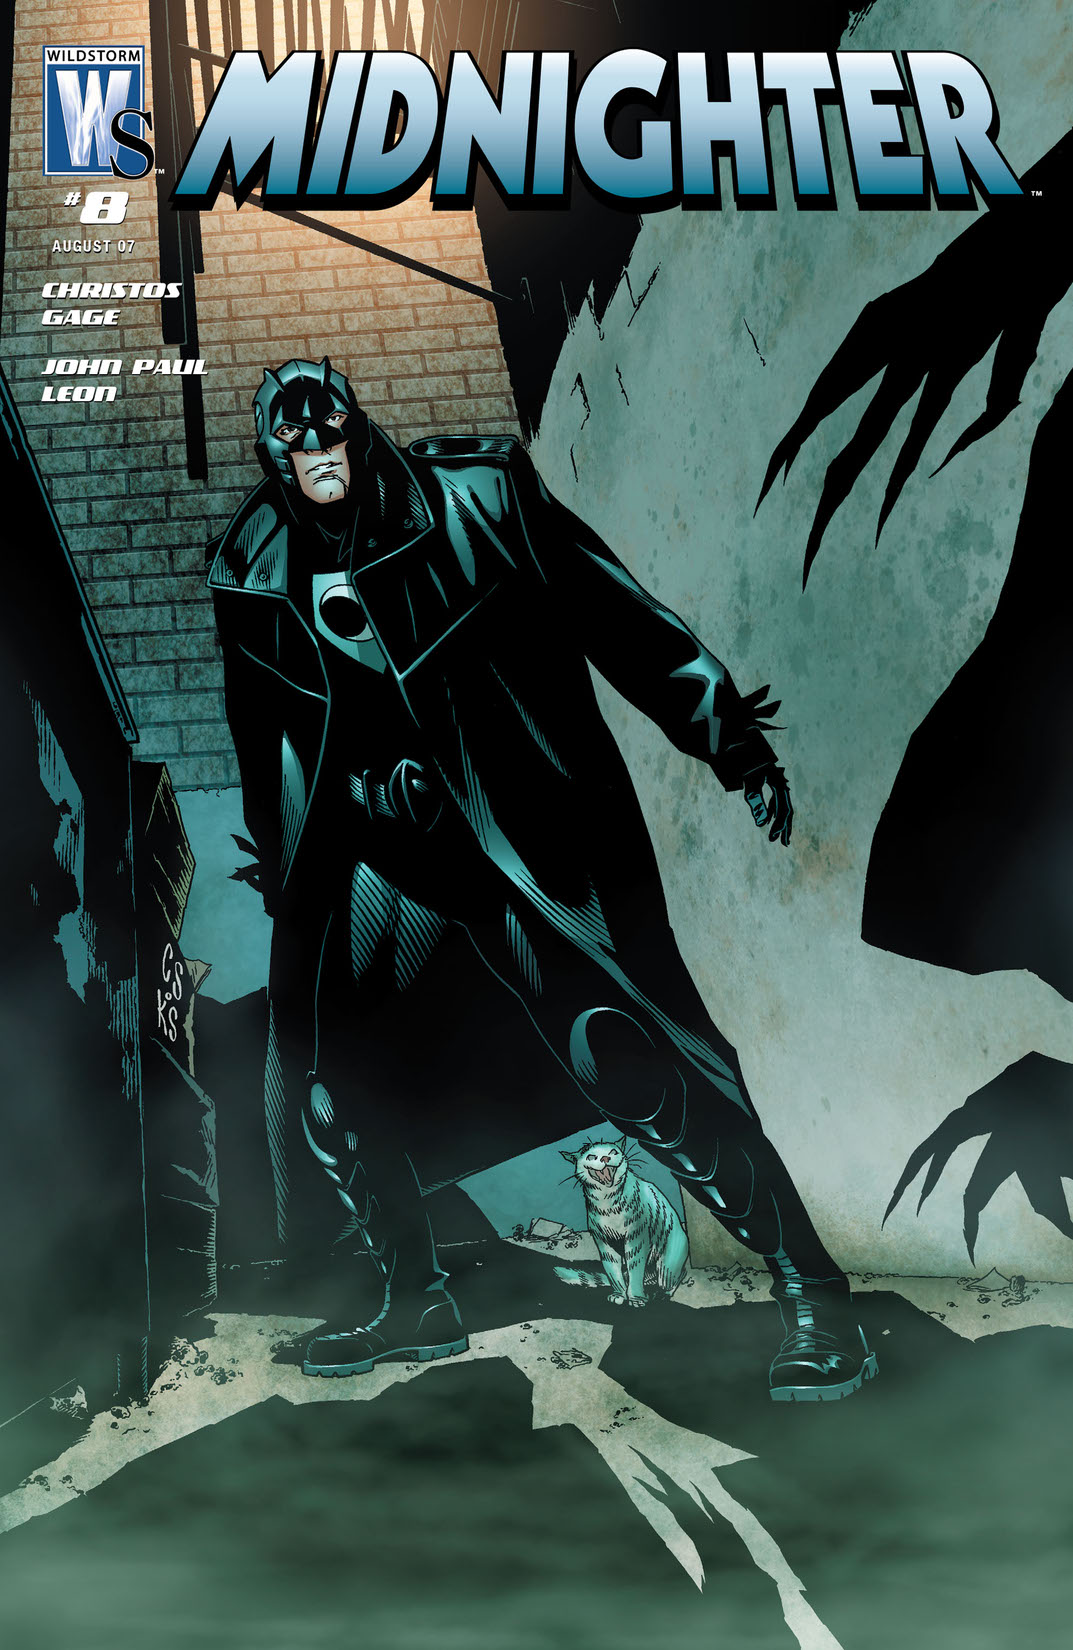 Midnighter (2006-) #8 preview images